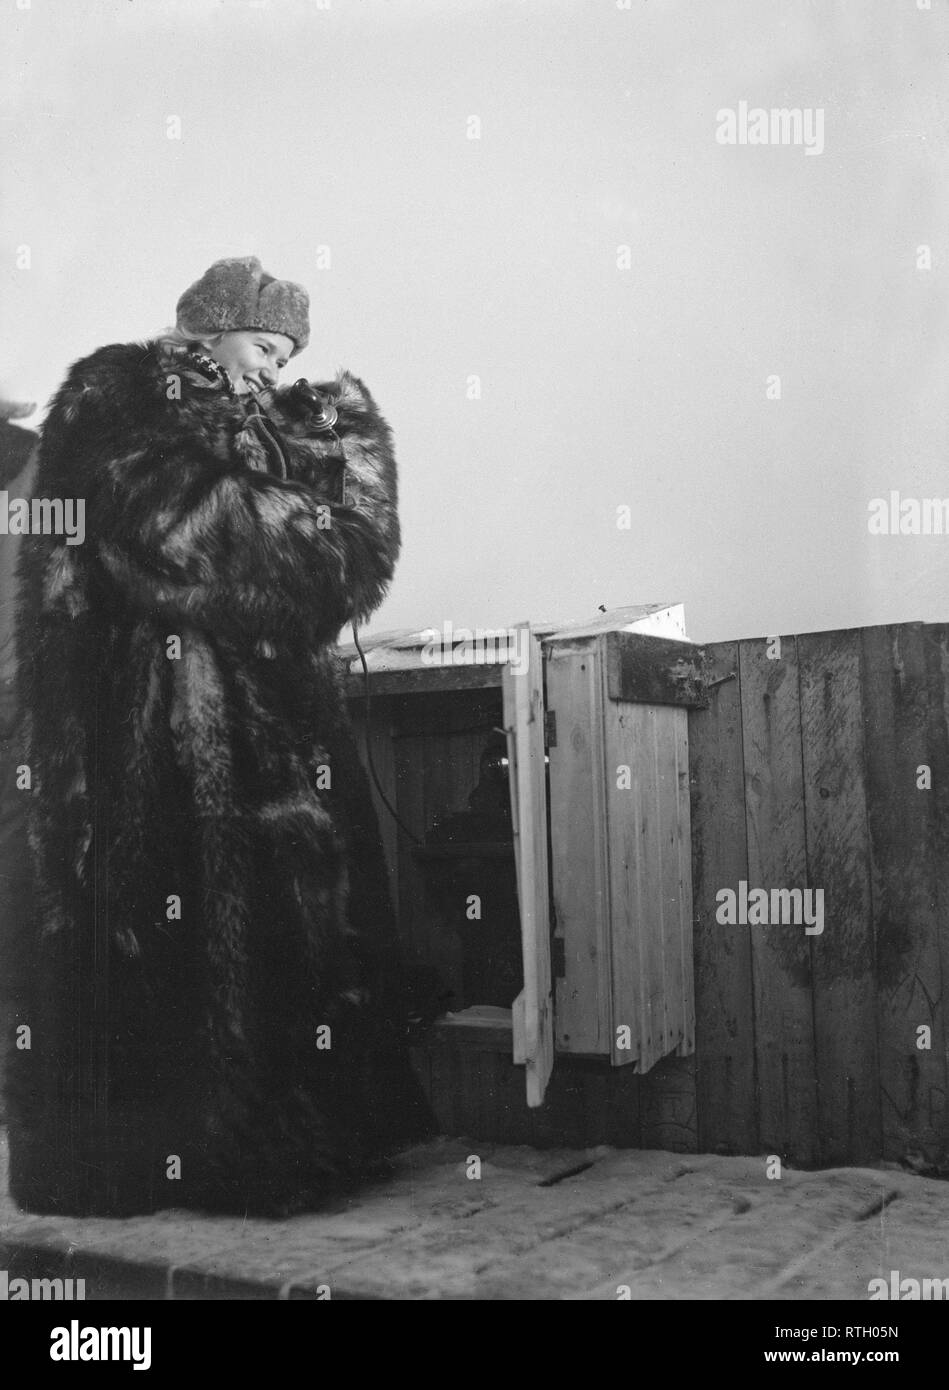 The Winter War. A military conflict between the Soviet union and Finland. It began with a Soviet invasion on november 1939 when Soviet infantery crossed the border on the Karelian Isthmus. About 9500 Swedish volunteer soldiers participated in the war. Pictured a young woman on top of a building in Helsinki. She is part of the air defense personnel and has the important task to monitor and report any enemy aircrafts. A telephone is seen. The weather during the war was exteremely cold and was as low as minus 40 degrees. She is therefore wearing a warm fur coat.   January 1940. Photo Kristofferss Stock Photo